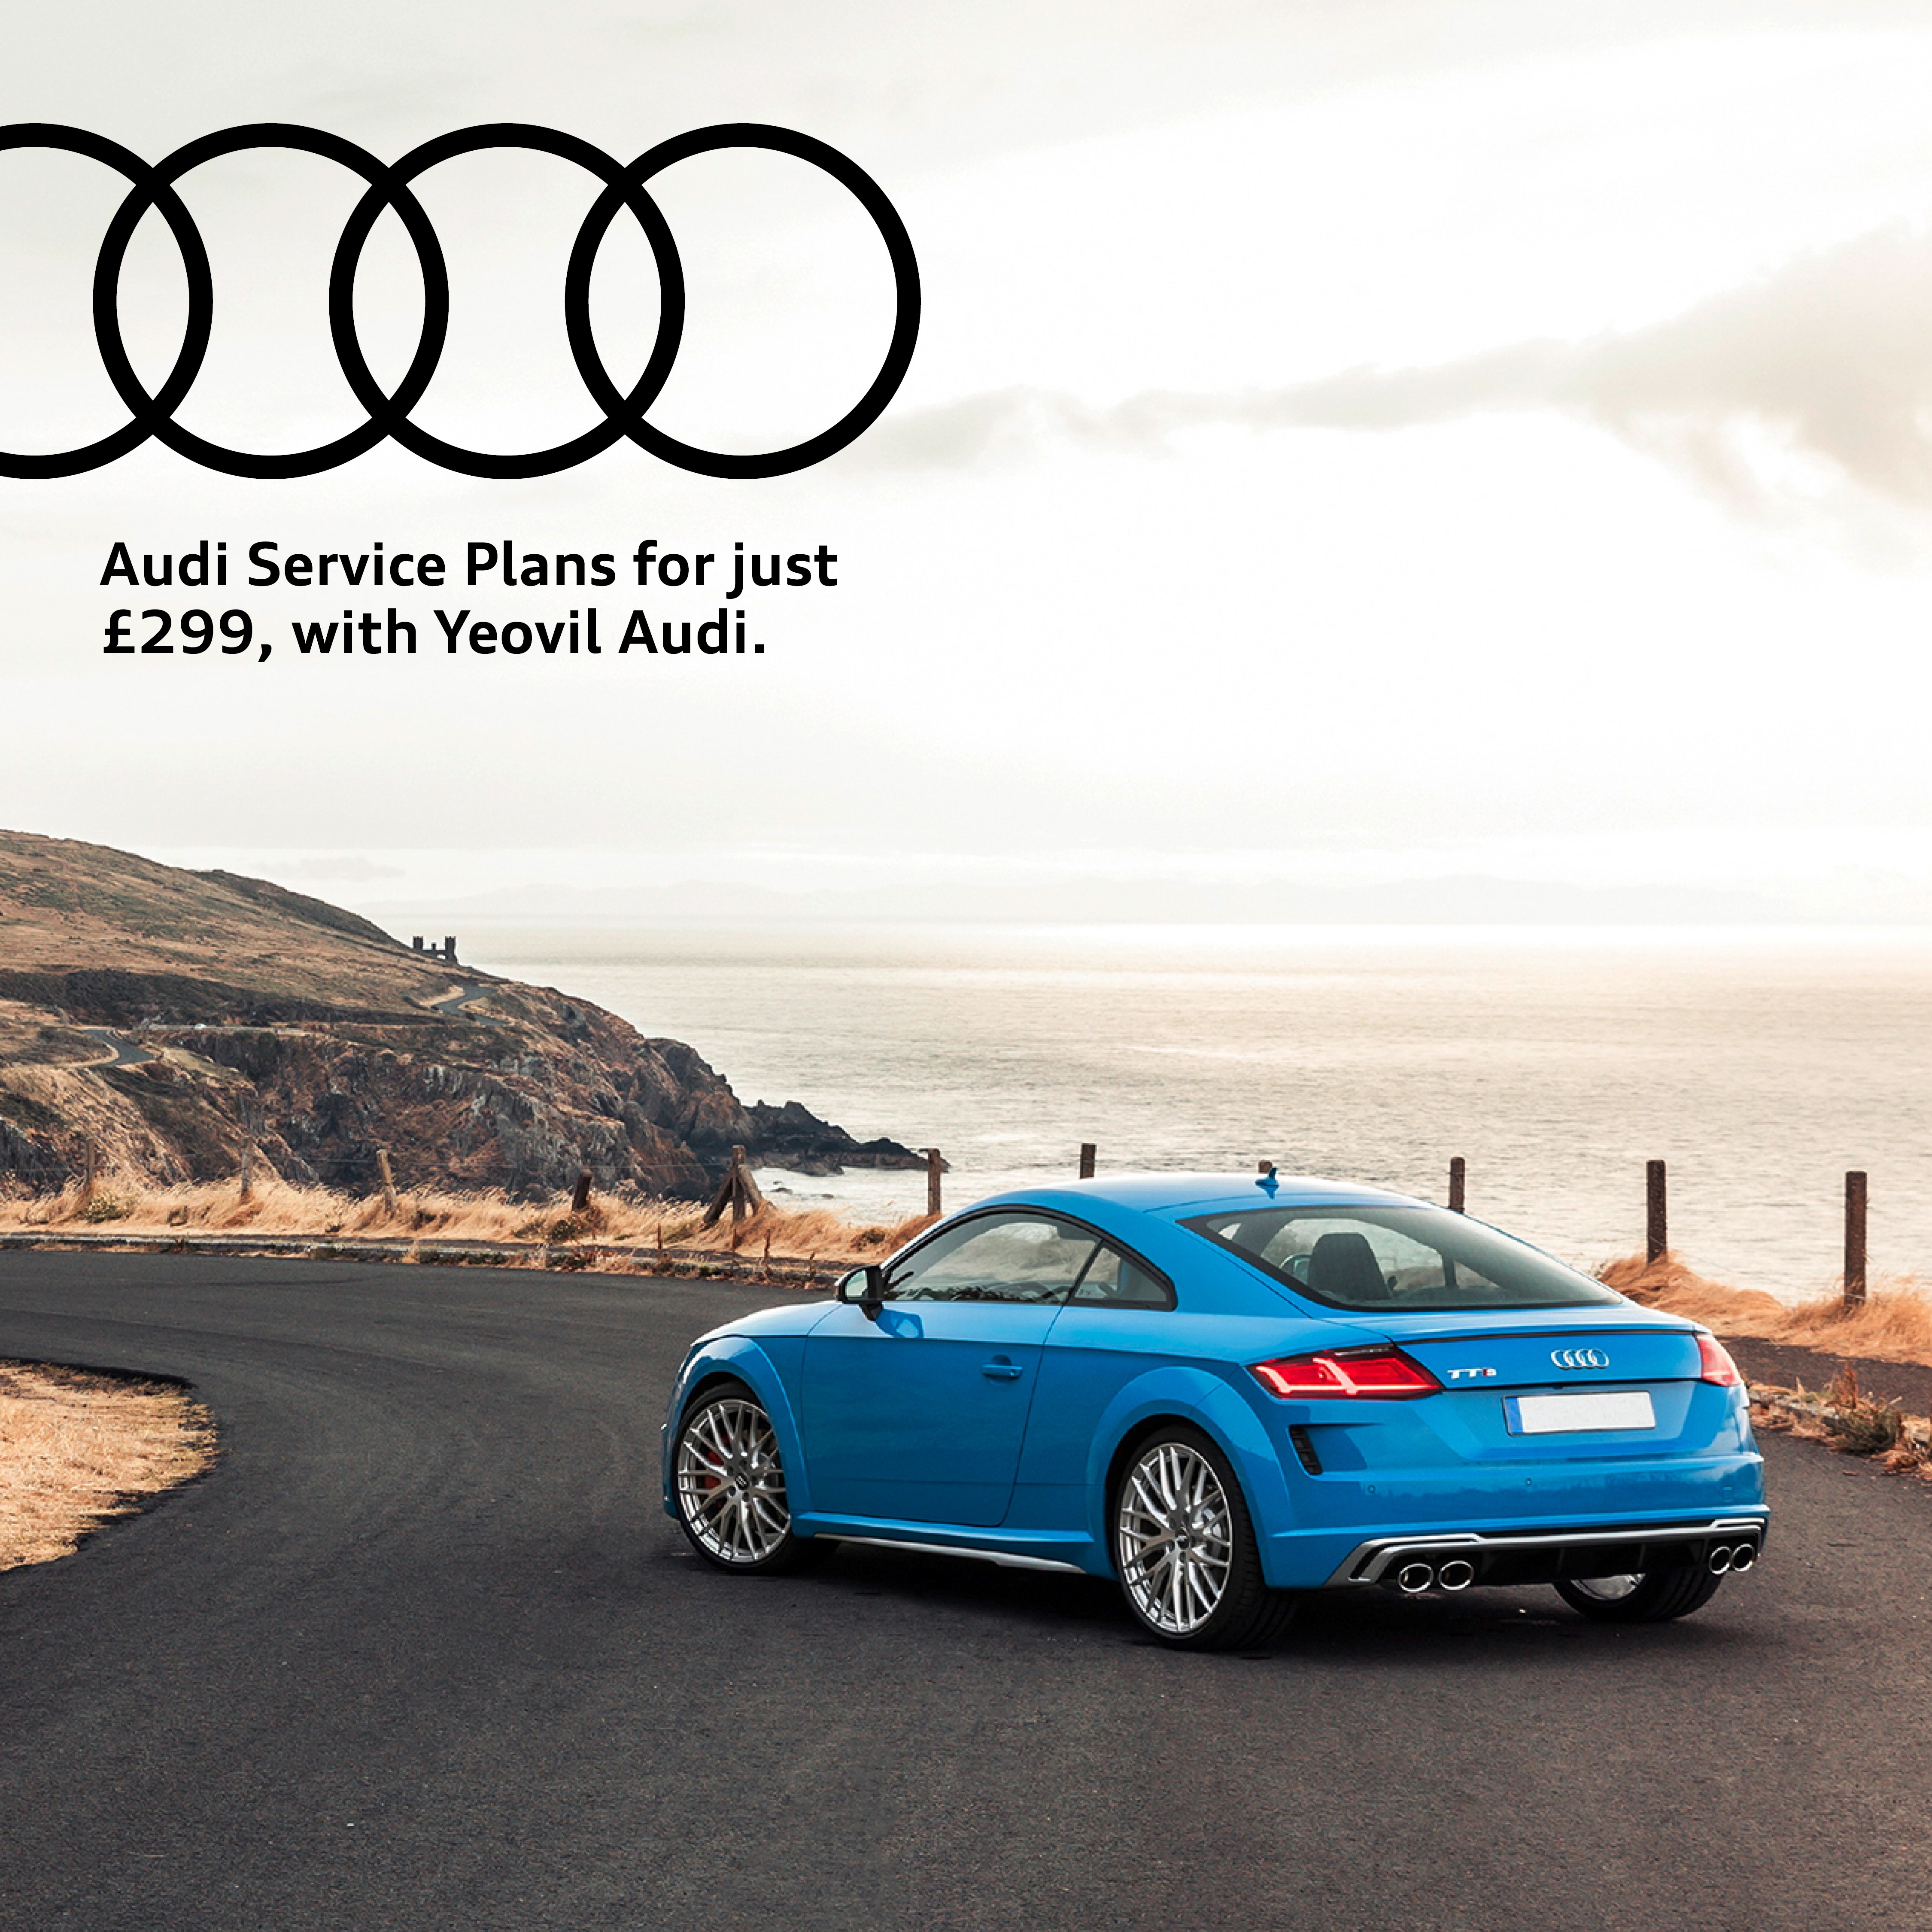 Two Services for just £299 with Yeovil Audi